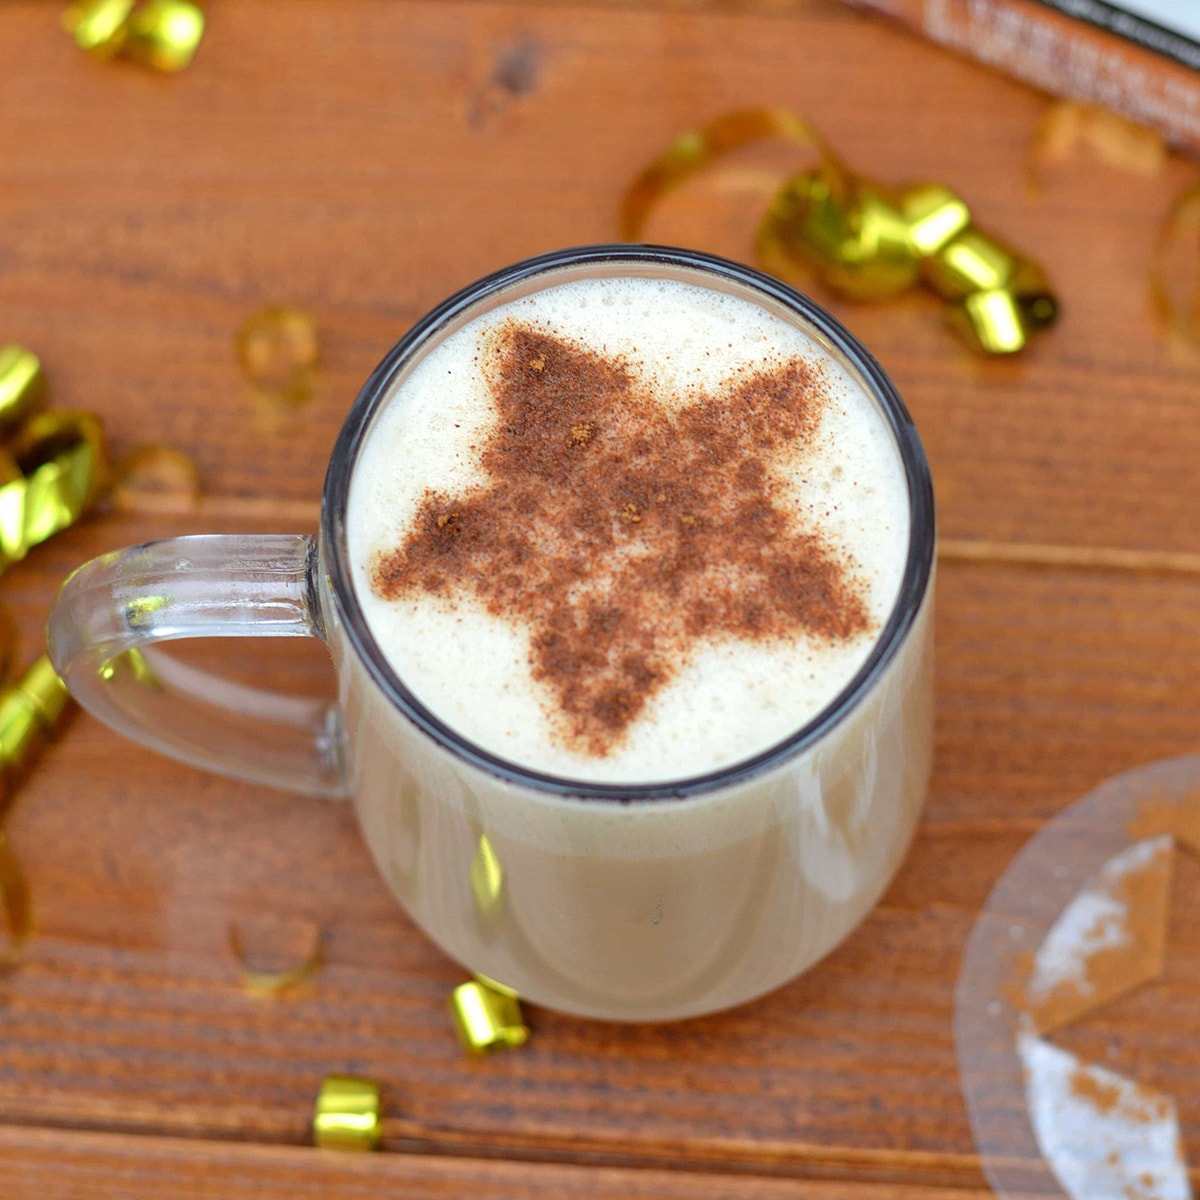 Latte with a star shaped cinnamon stenciled into the frothy milk.